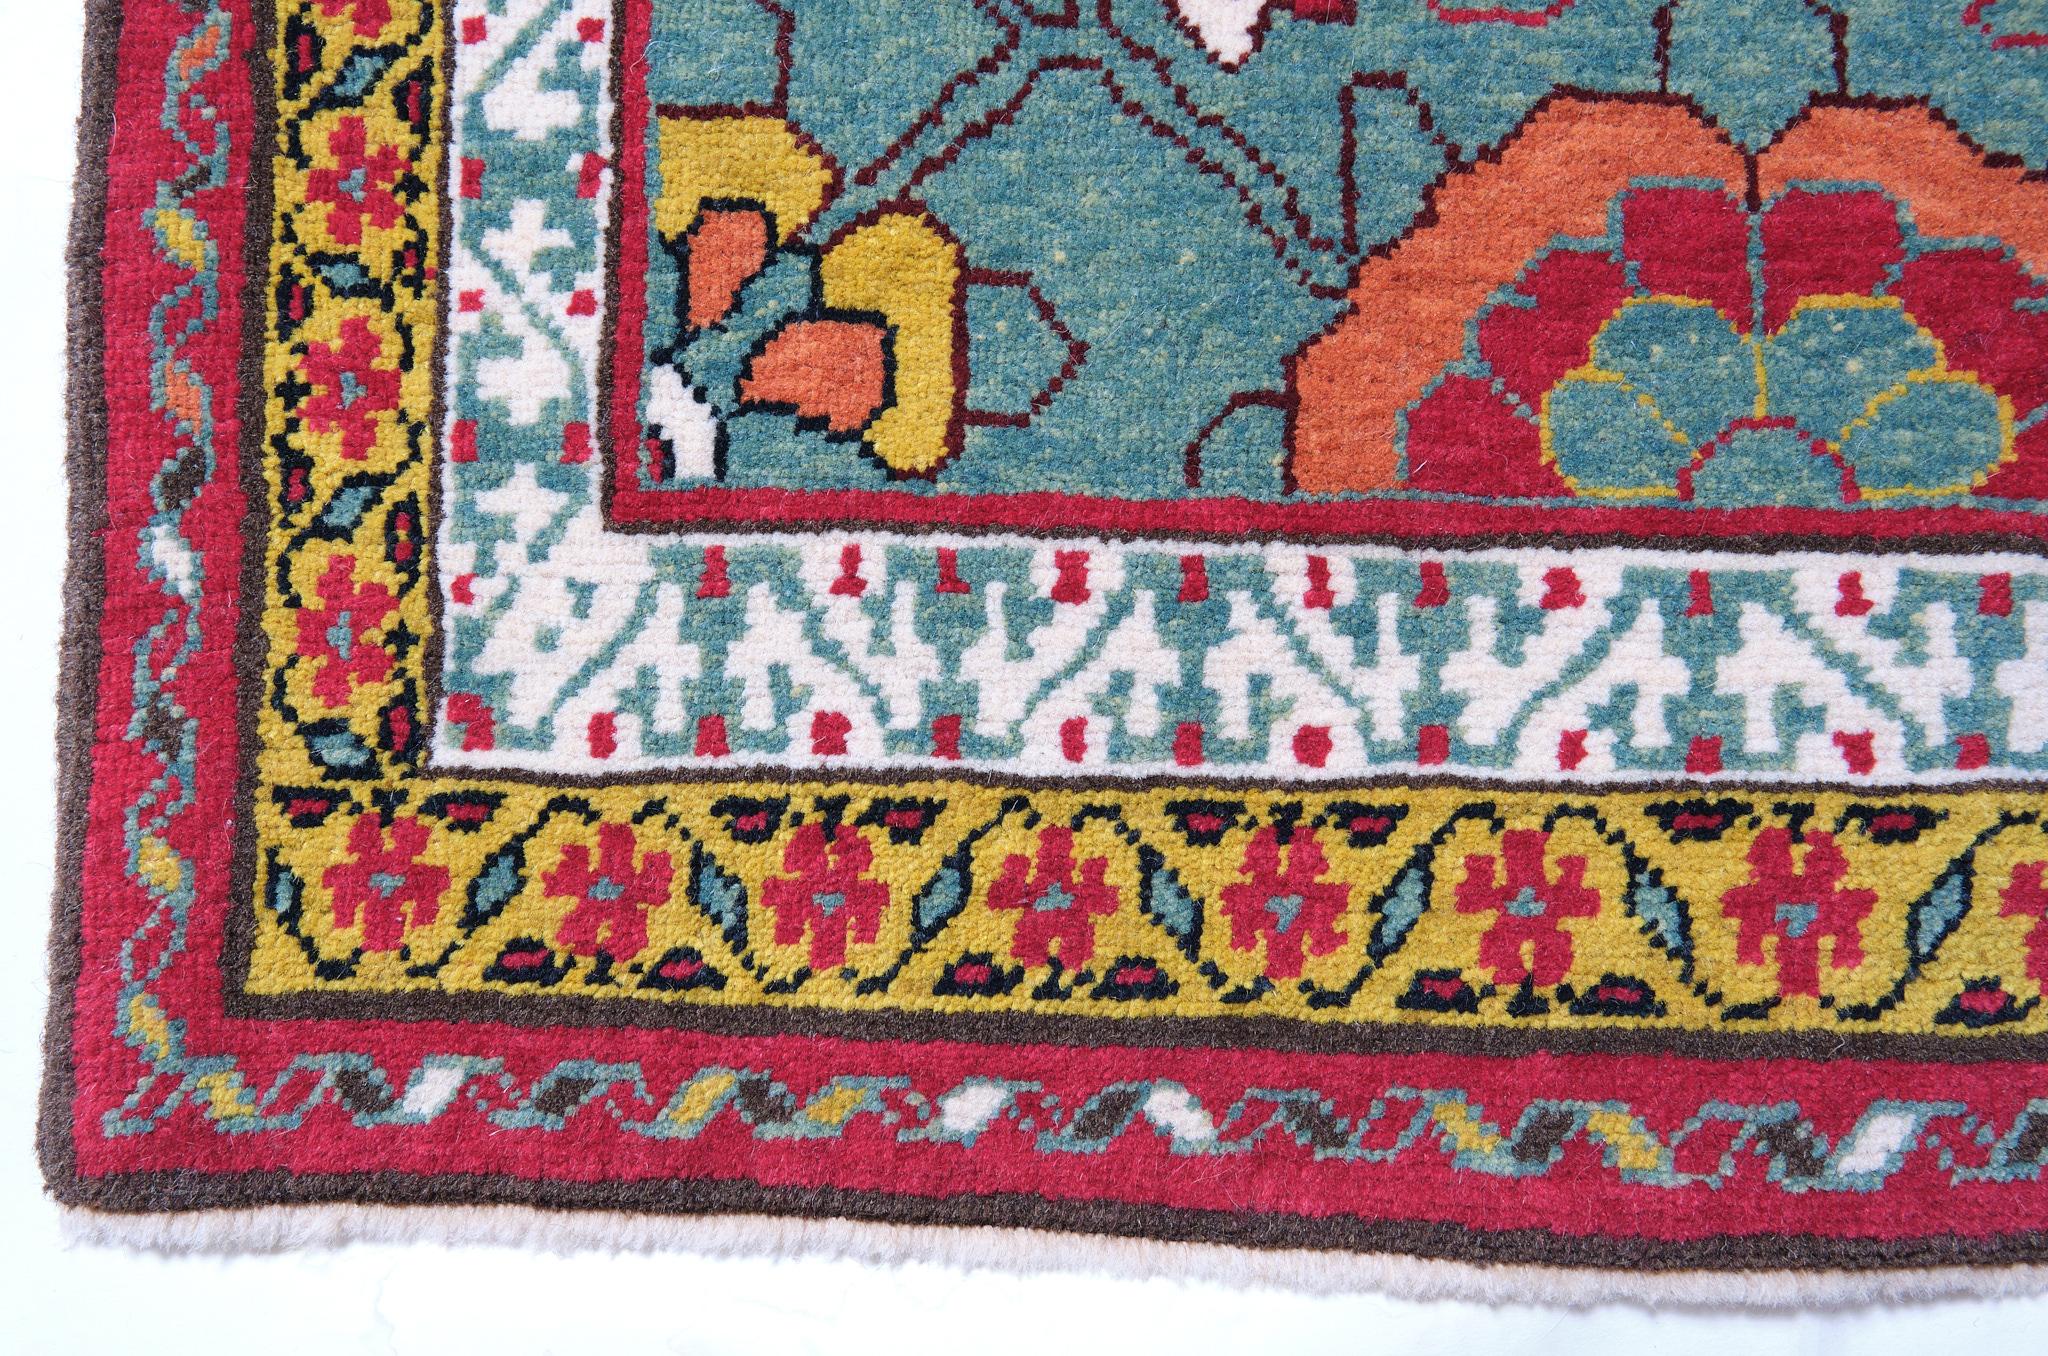 The source of the rug comes from the book Antique Rugs of Kurdistan A Historical Legacy of Woven Art, James D. Burns, 2002 nr.4. This was an exclusive example of a Mina Khani lattice design mid-19th century rug from Koliya’i, Southern Kurdistan